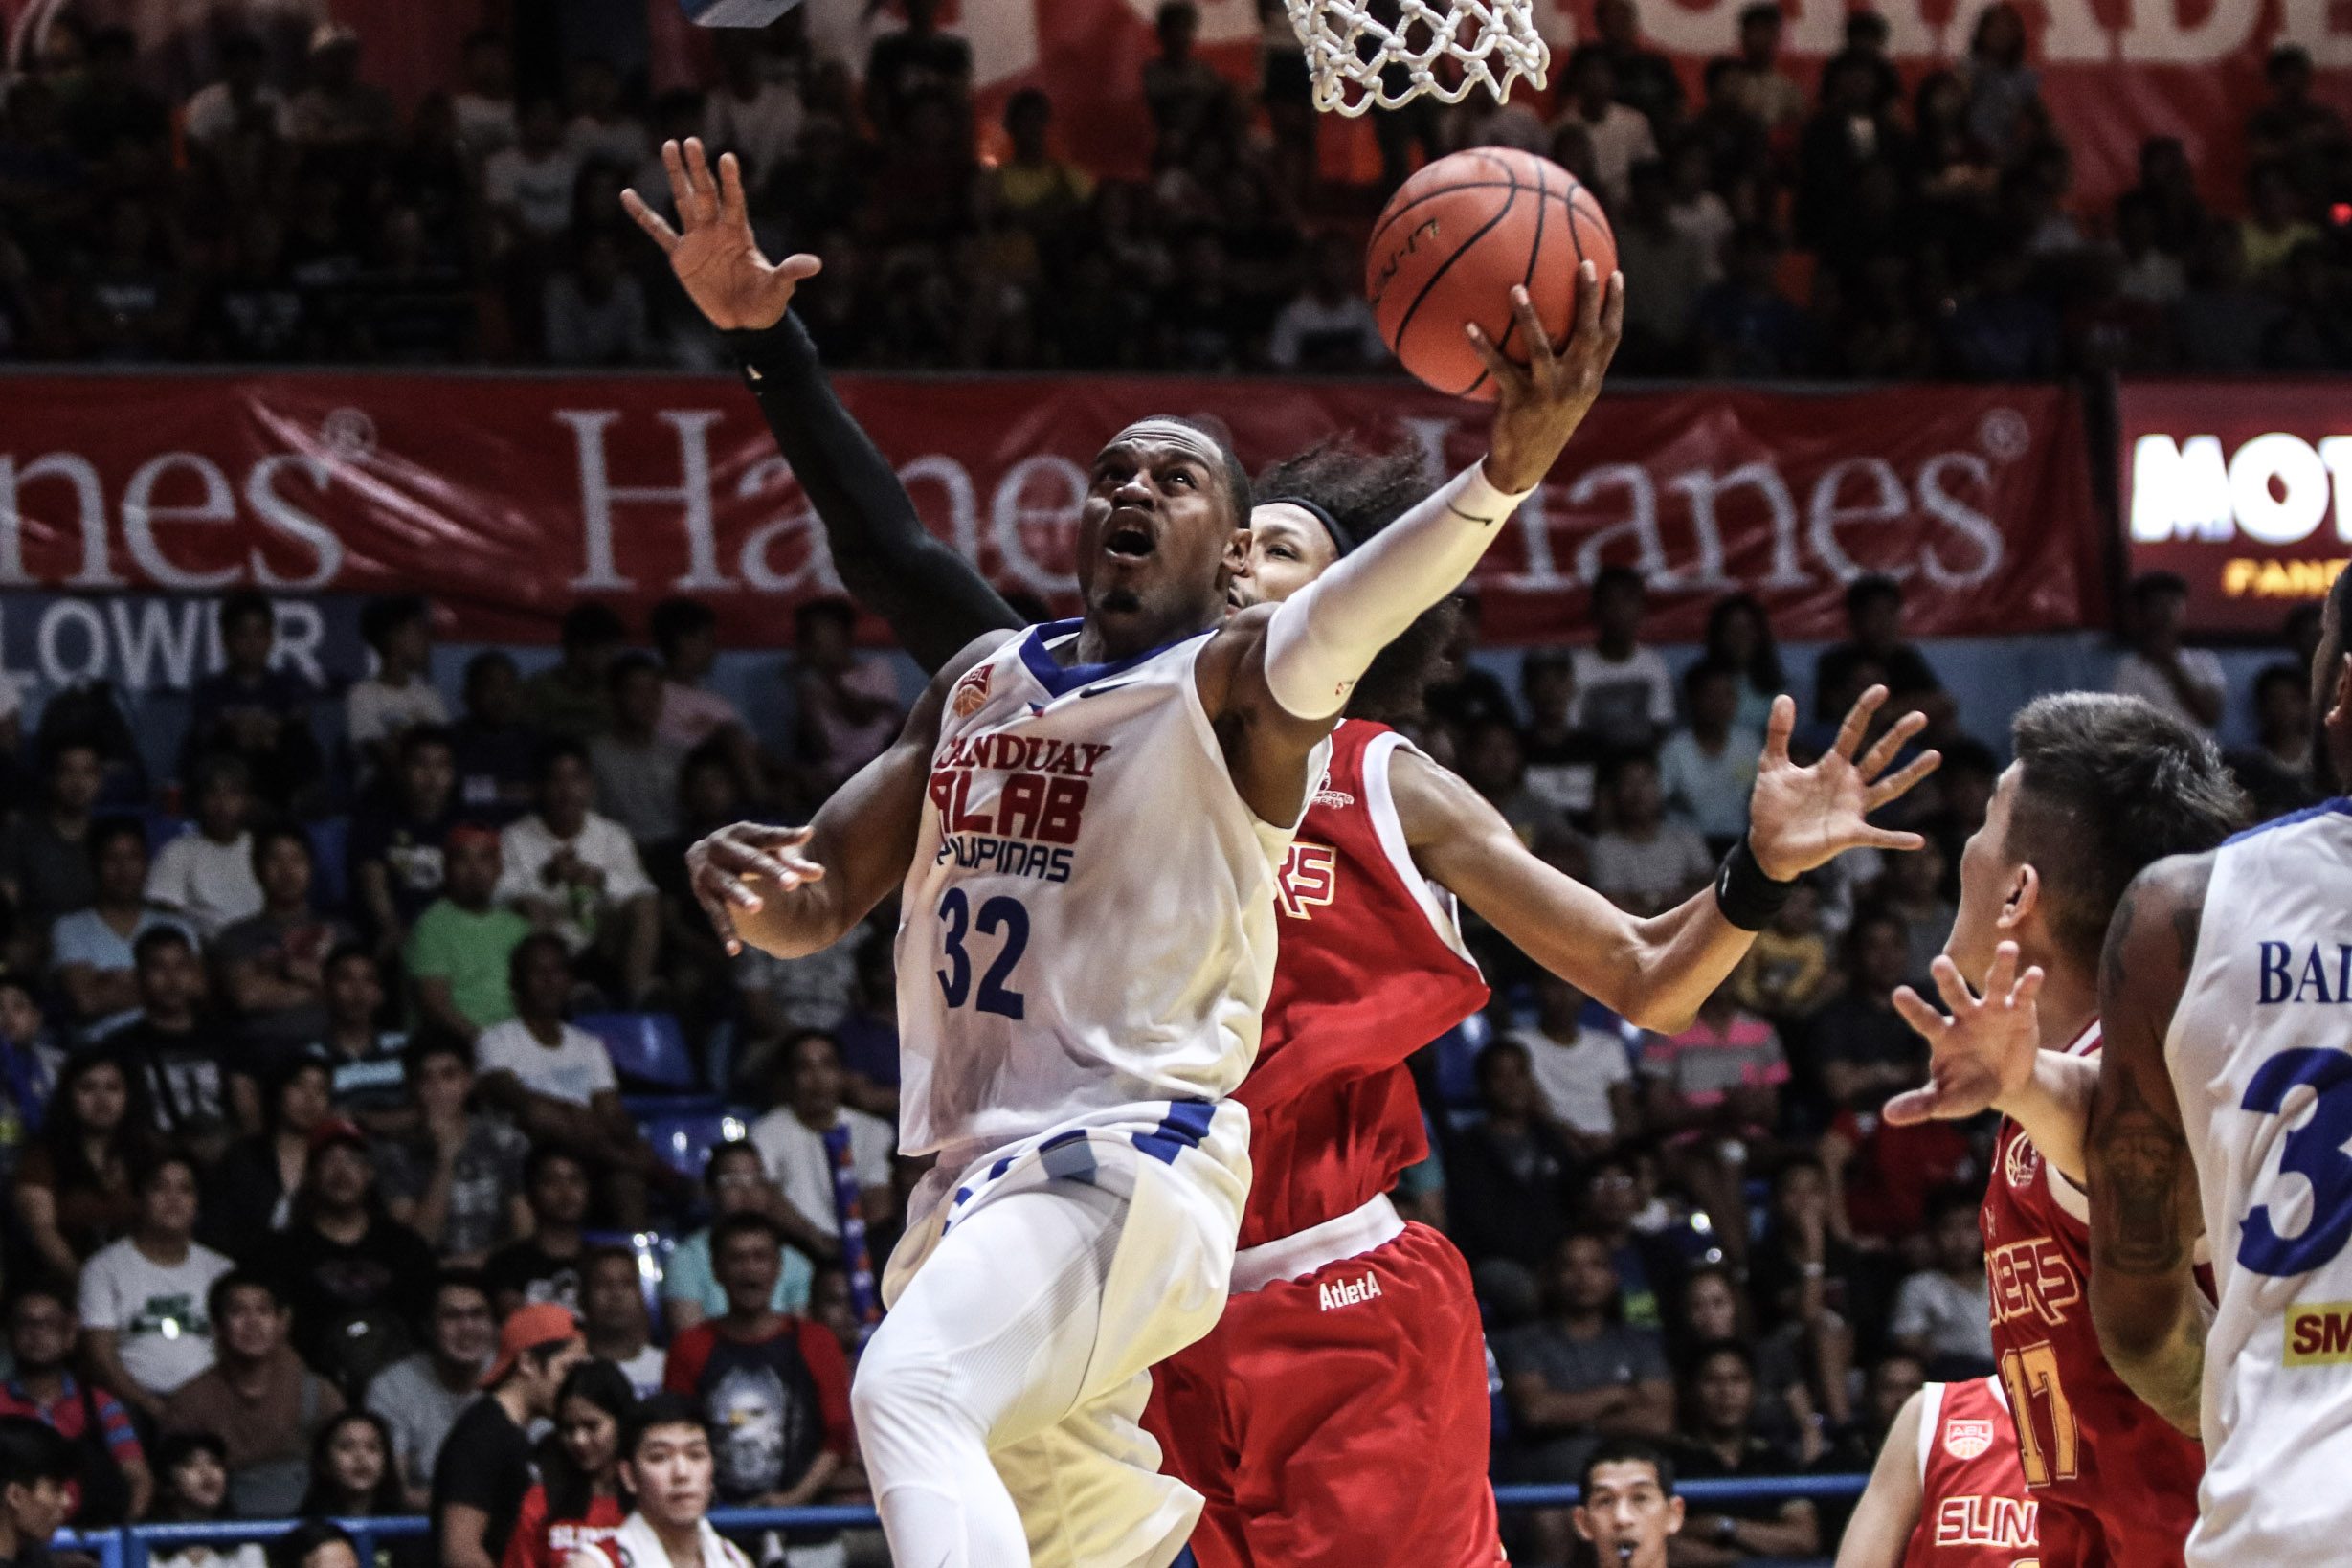 Justin Brownlee now missing in action from Alab Pilipinas